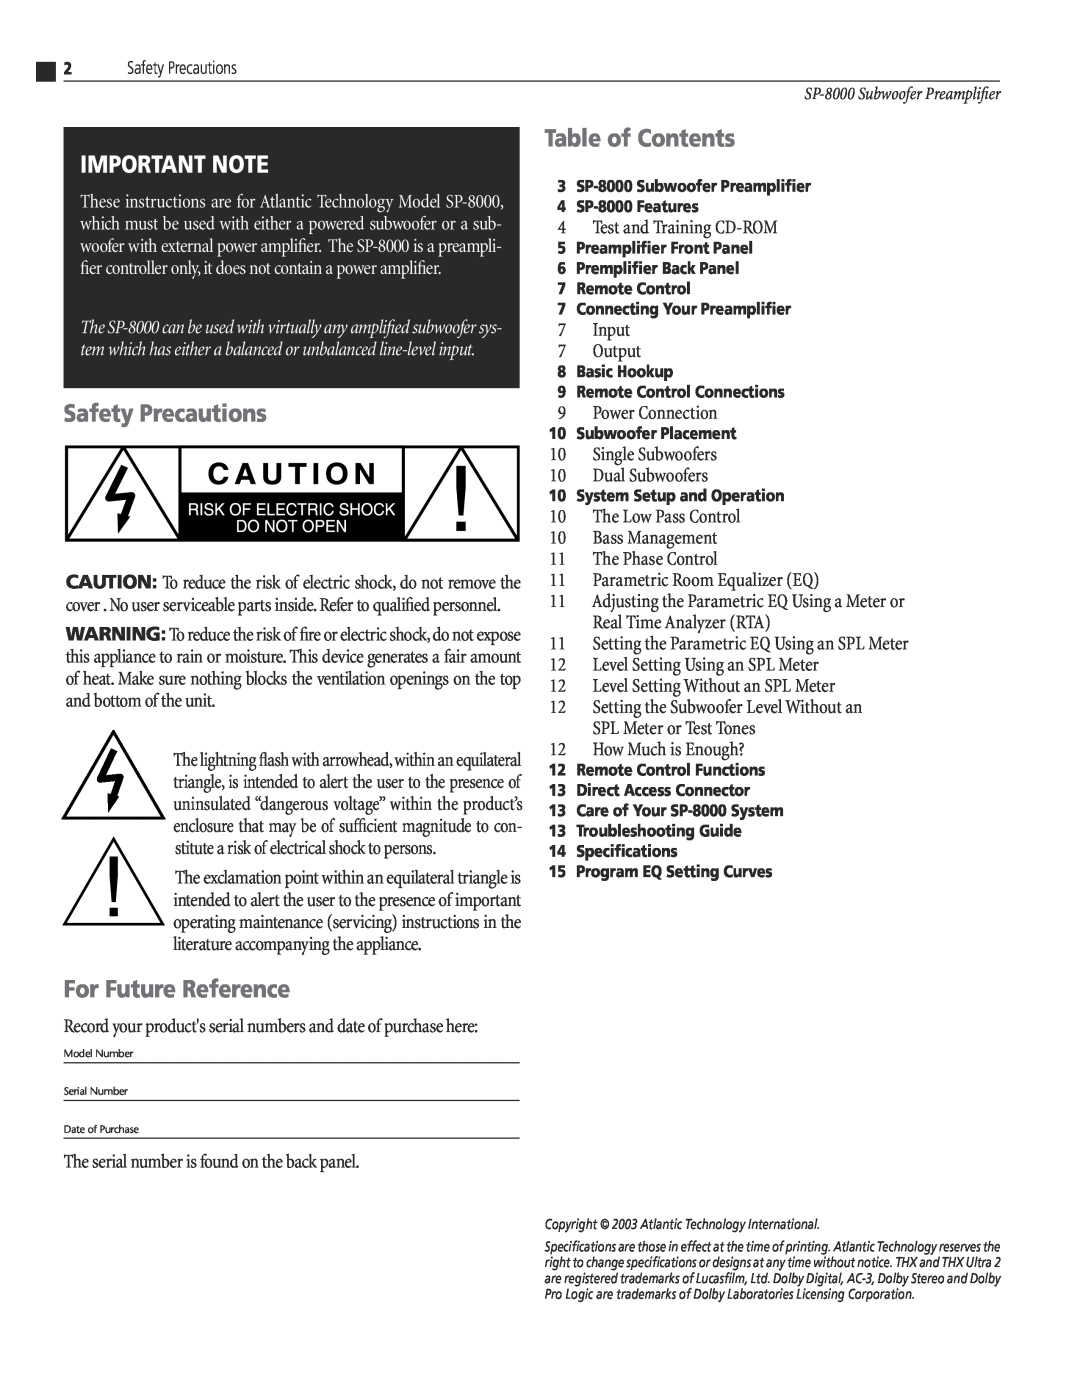 Atlantic Technology SP-8000 instruction manual Safety Precautions, Table of Contents, For Future Reference, Important Note 